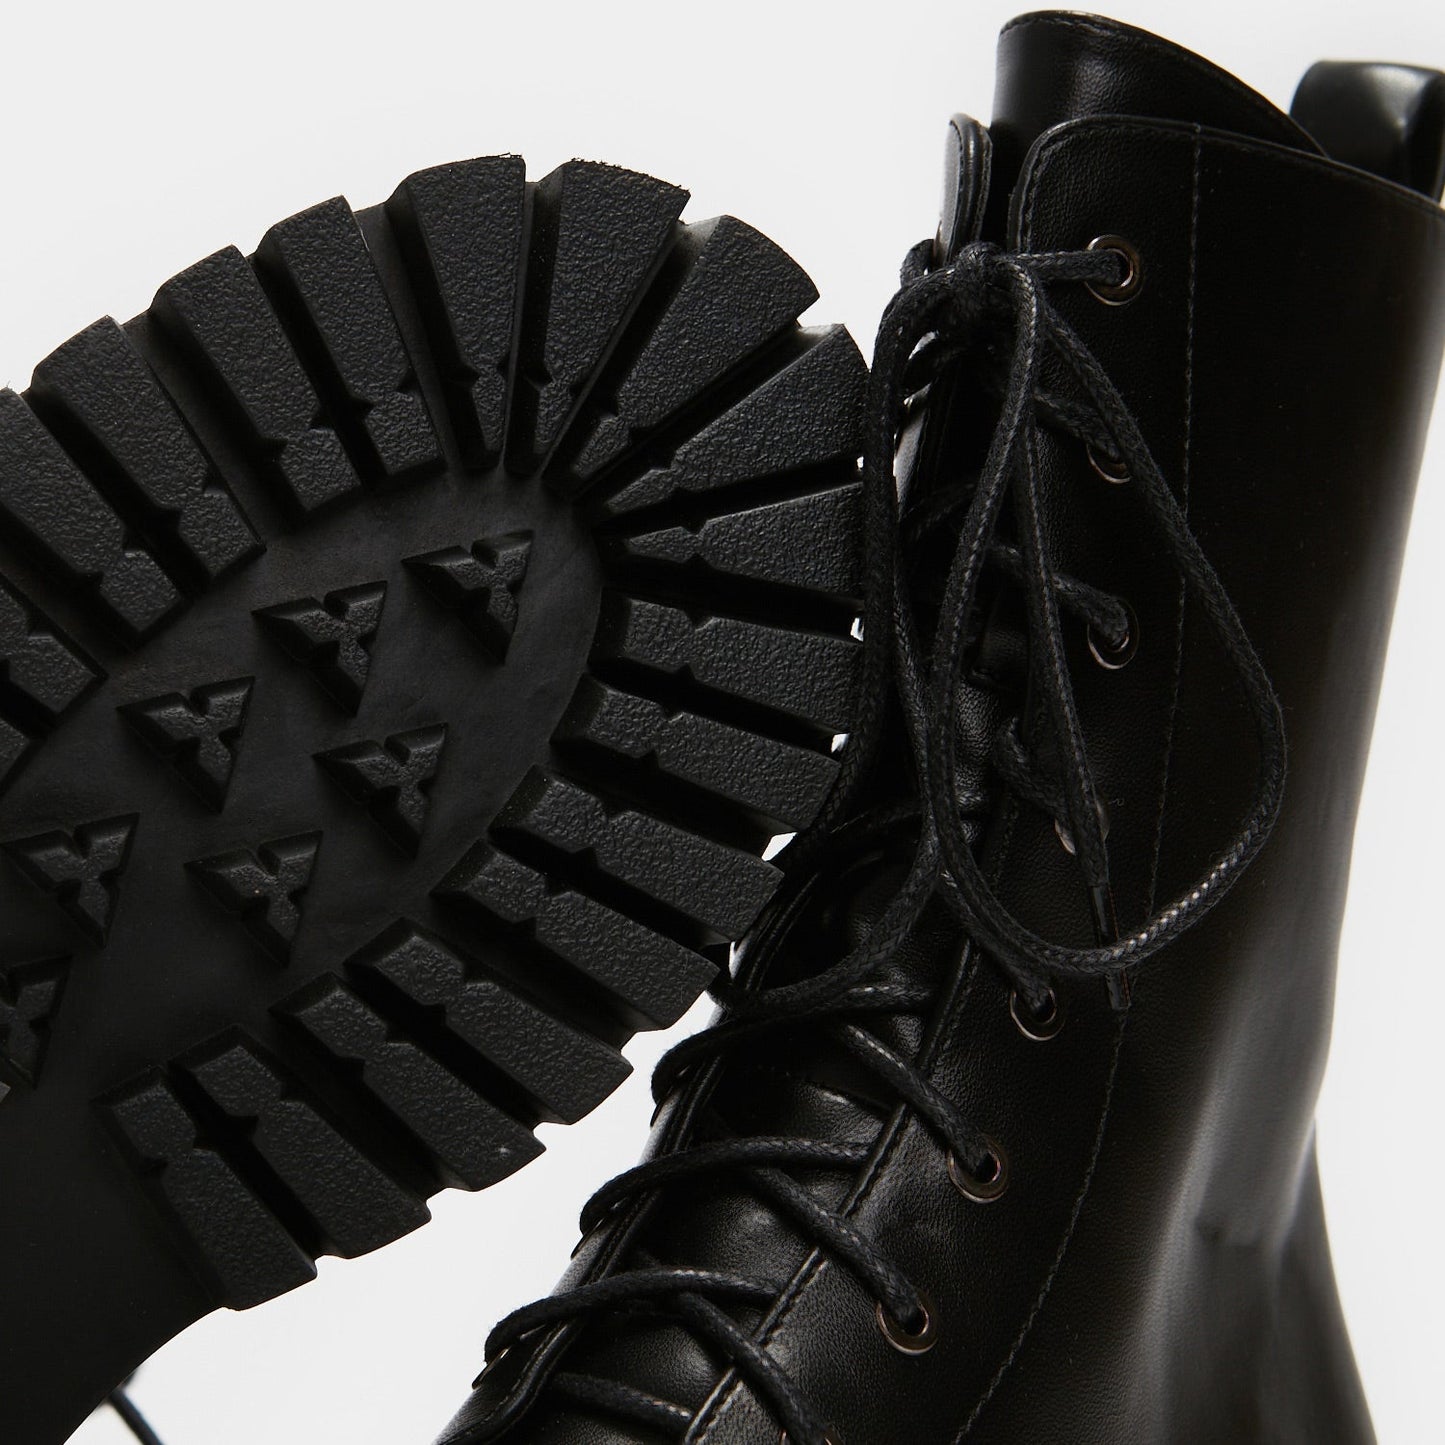 Anchor Black Military Lace Up Boots - Ankle Boots - KOI Footwear - Black - Sole Detail